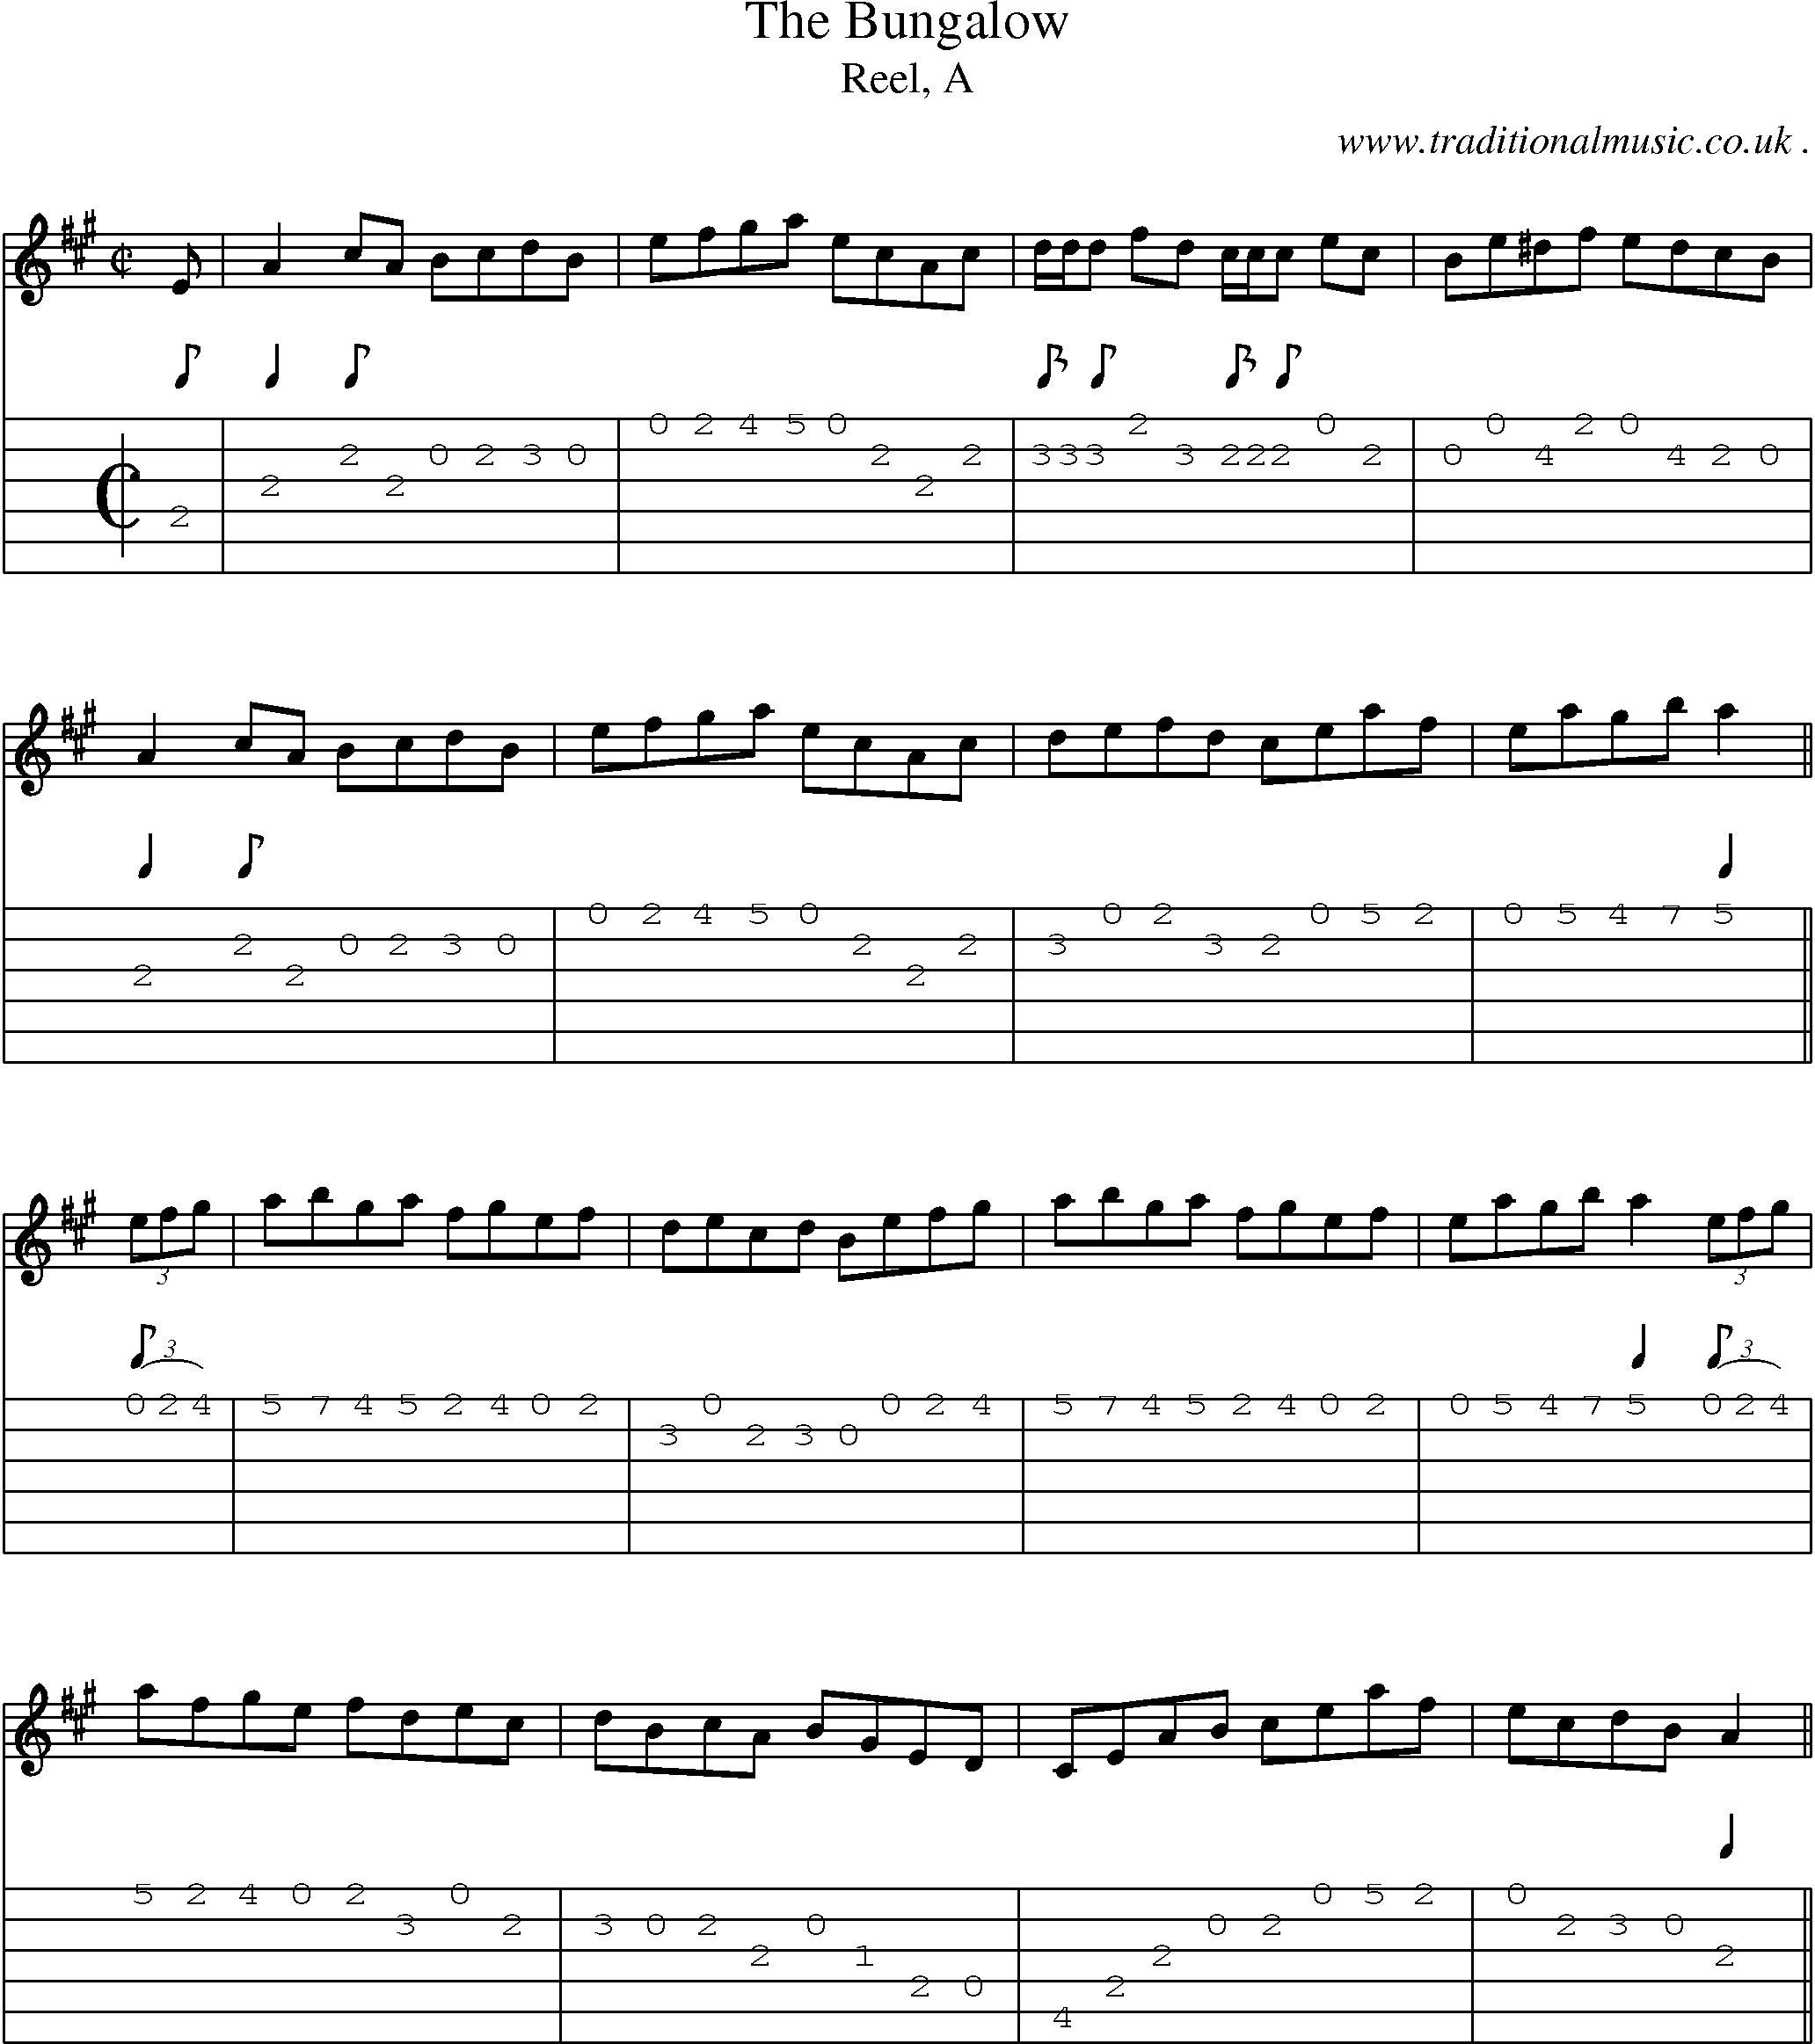 Sheet-music  score, Chords and Guitar Tabs for The Bungalow